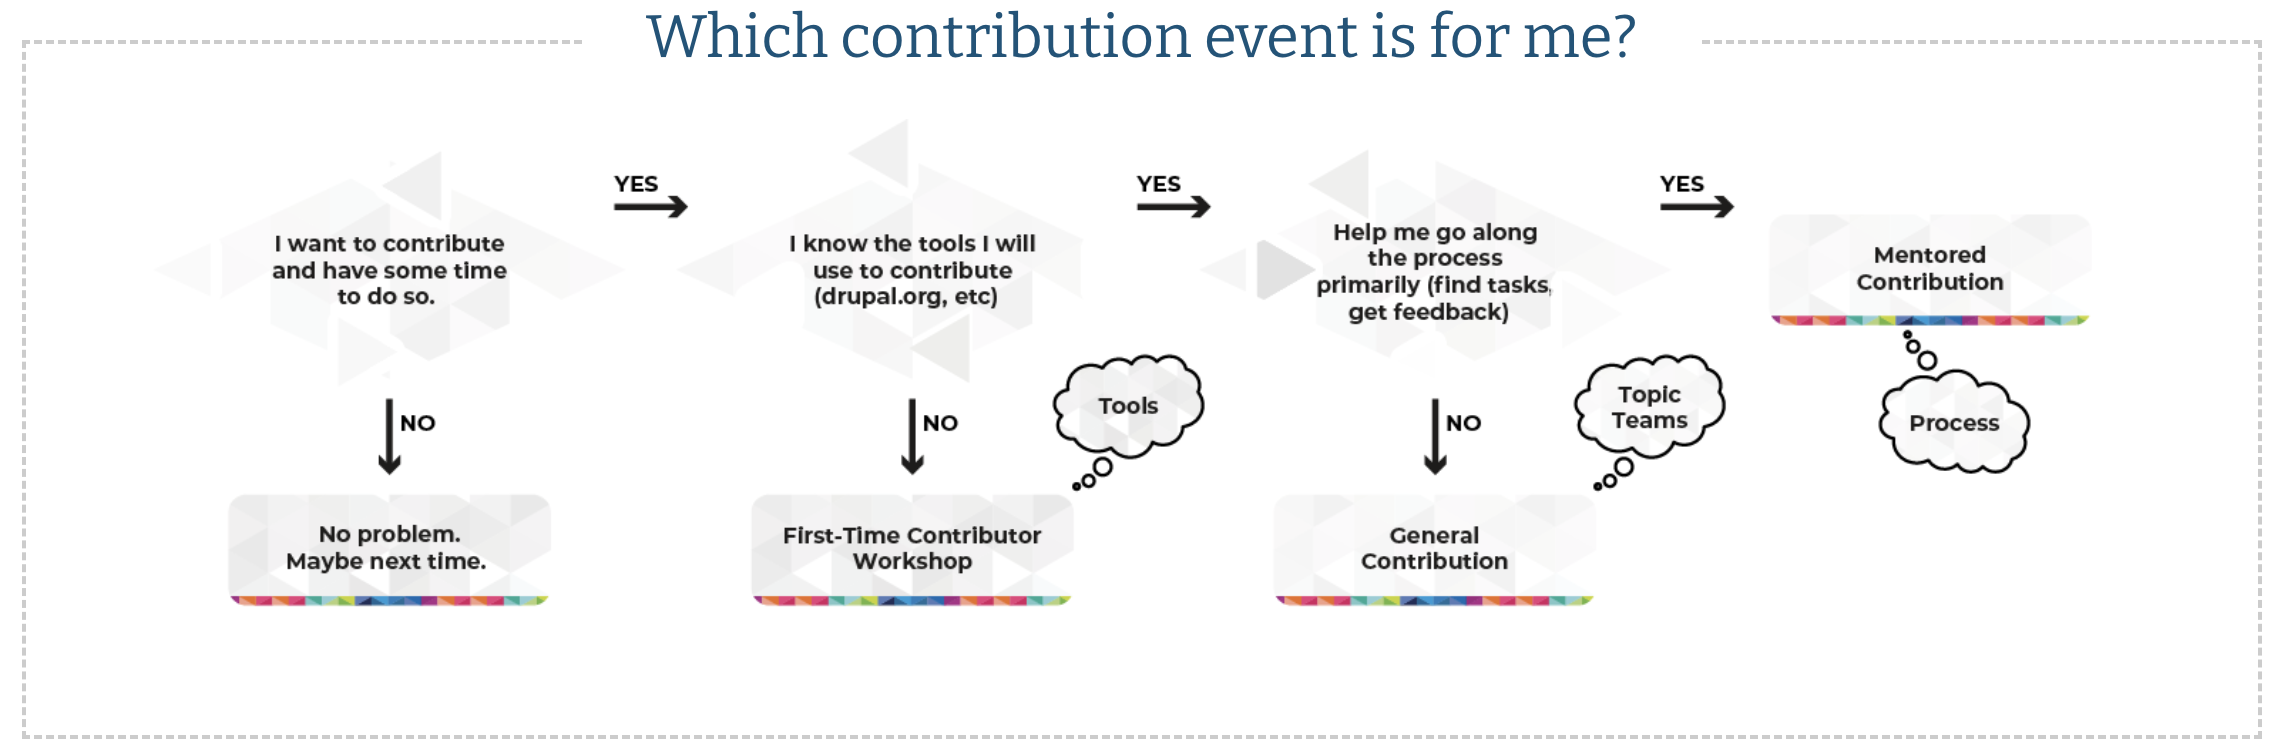 The contribution events cheat sheet for DrupalCon Prague 2022 participants wondering what to choose